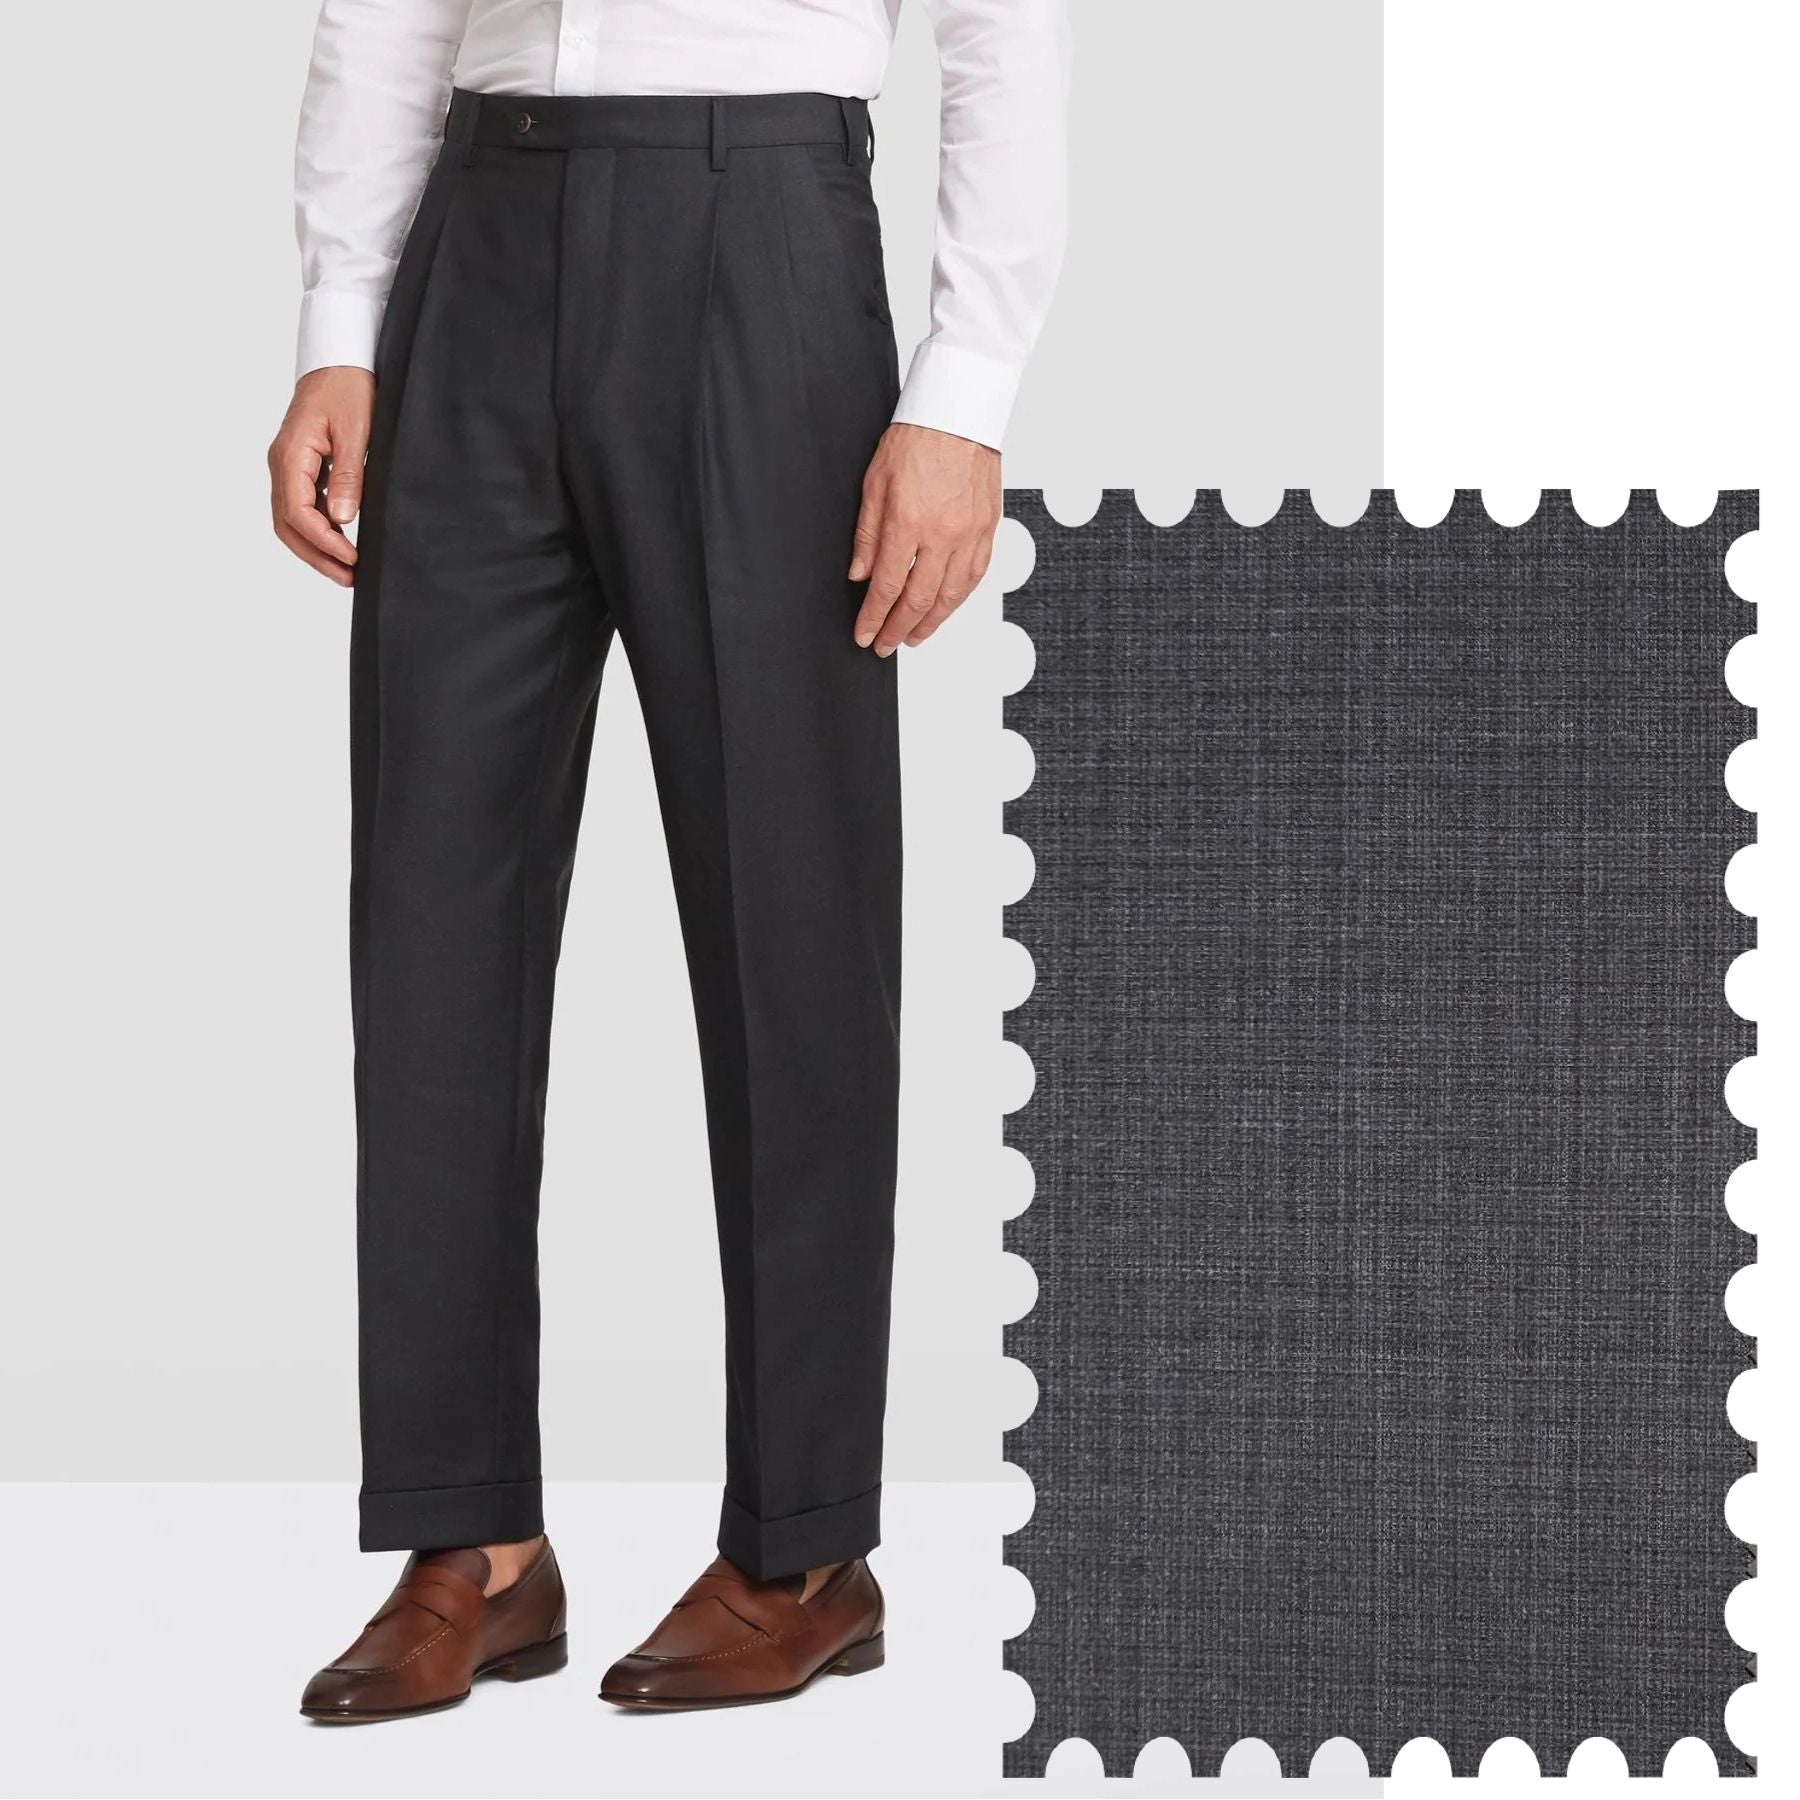 Bennett Double Pleated Super 120s Wool Fancy Trouser in Charcoal & Grey Crosshatch (Full Fit) - LIMITED EDITION by Zanella